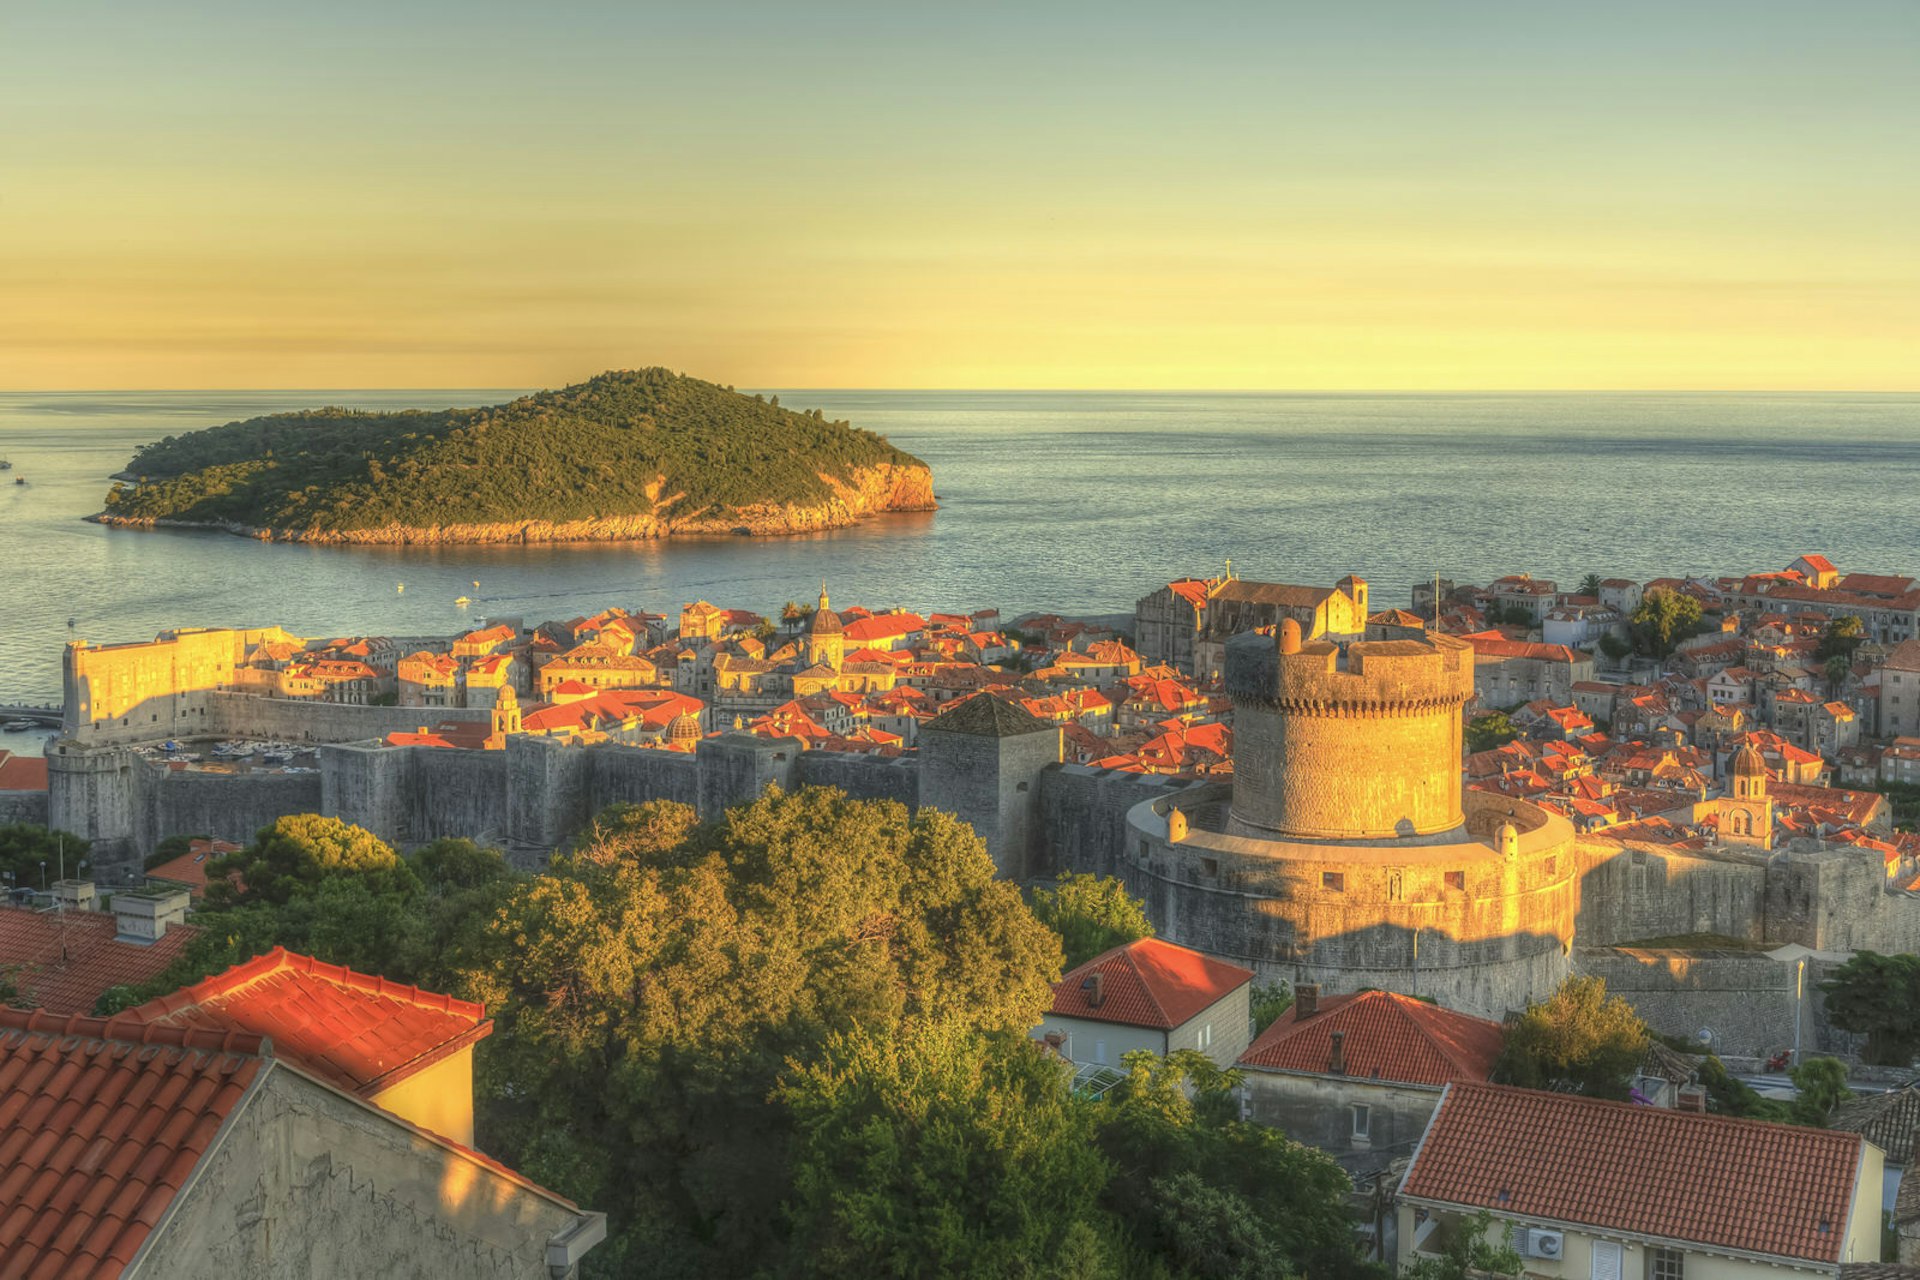 Dubrovnik's Old Town and Lokrum Island glow in the light of the setting sun 